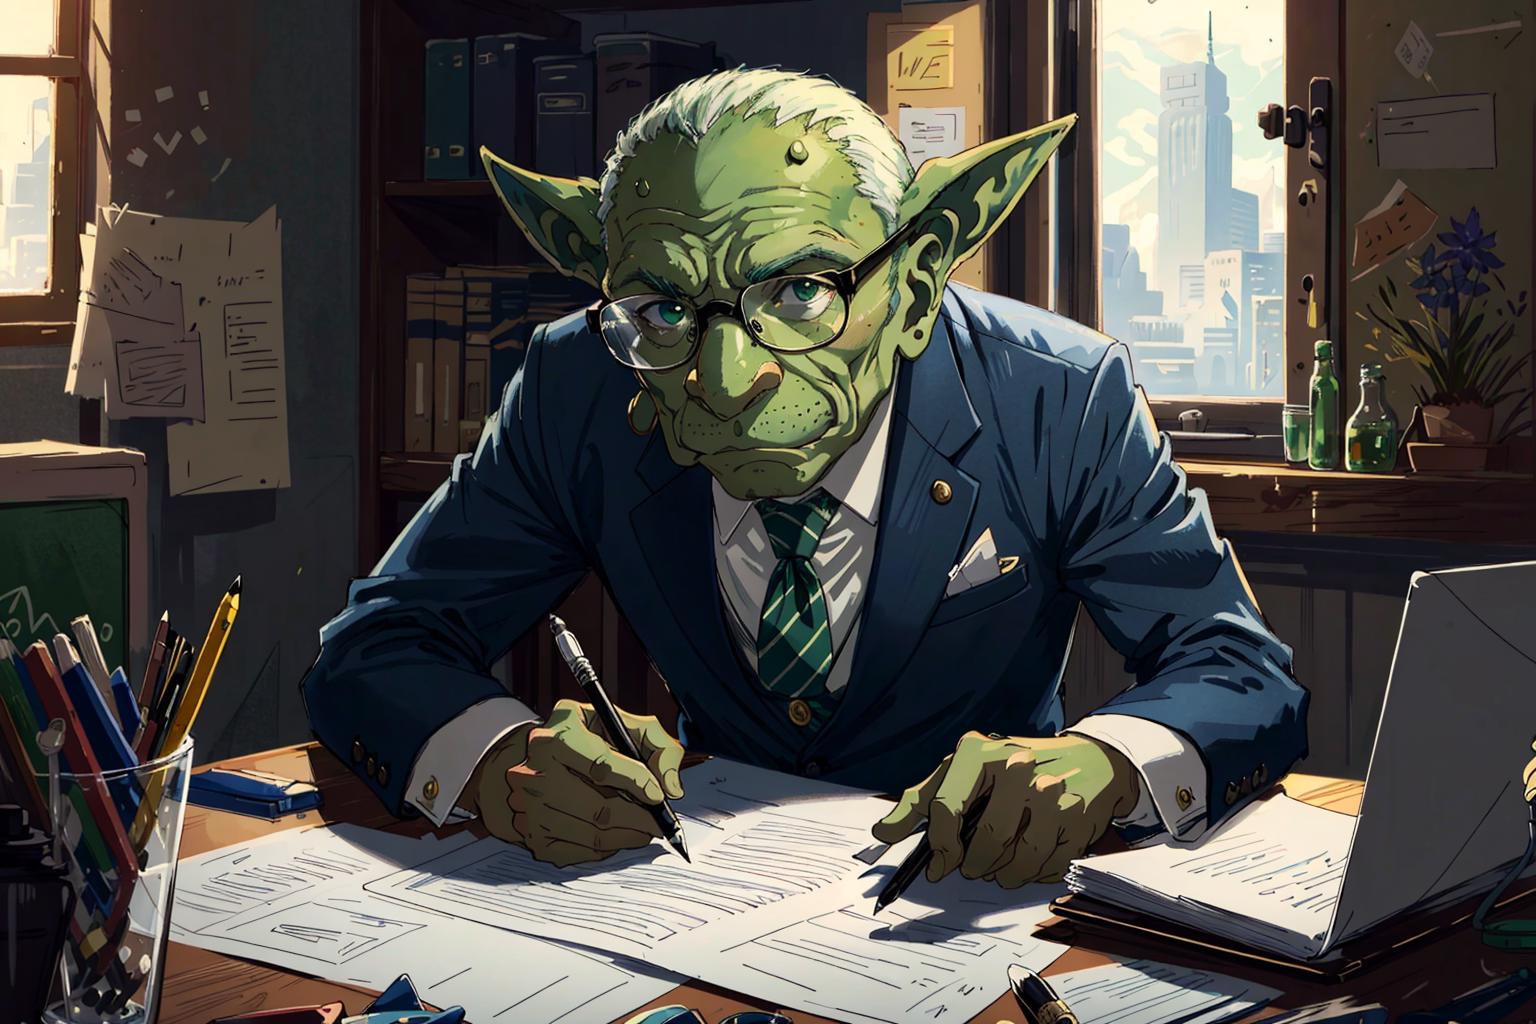 A green, old man wearing glasses and a suit is writing at a desk.